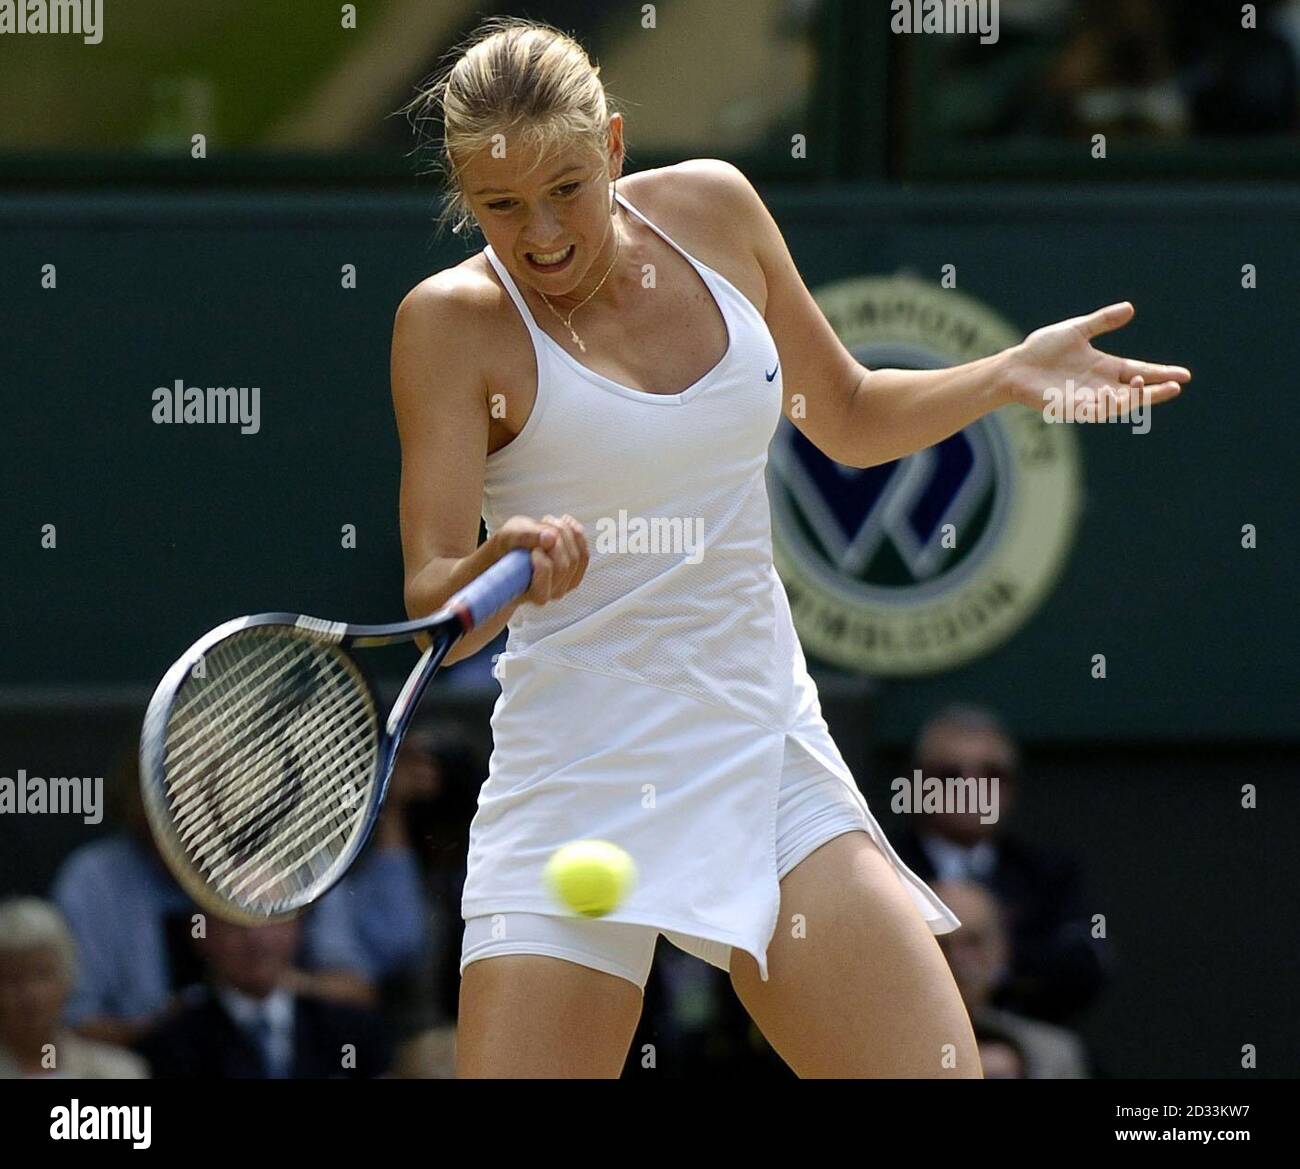 Maria Sharapova from Russia in action against Serena Williams from the USA in the final of the Ladies' Singles tournament at The Lawn Tennis Championships at Wimbledon, London.  EDITORIAL USE ONLY, NO MOBILE PHONE USE. Stock Photo